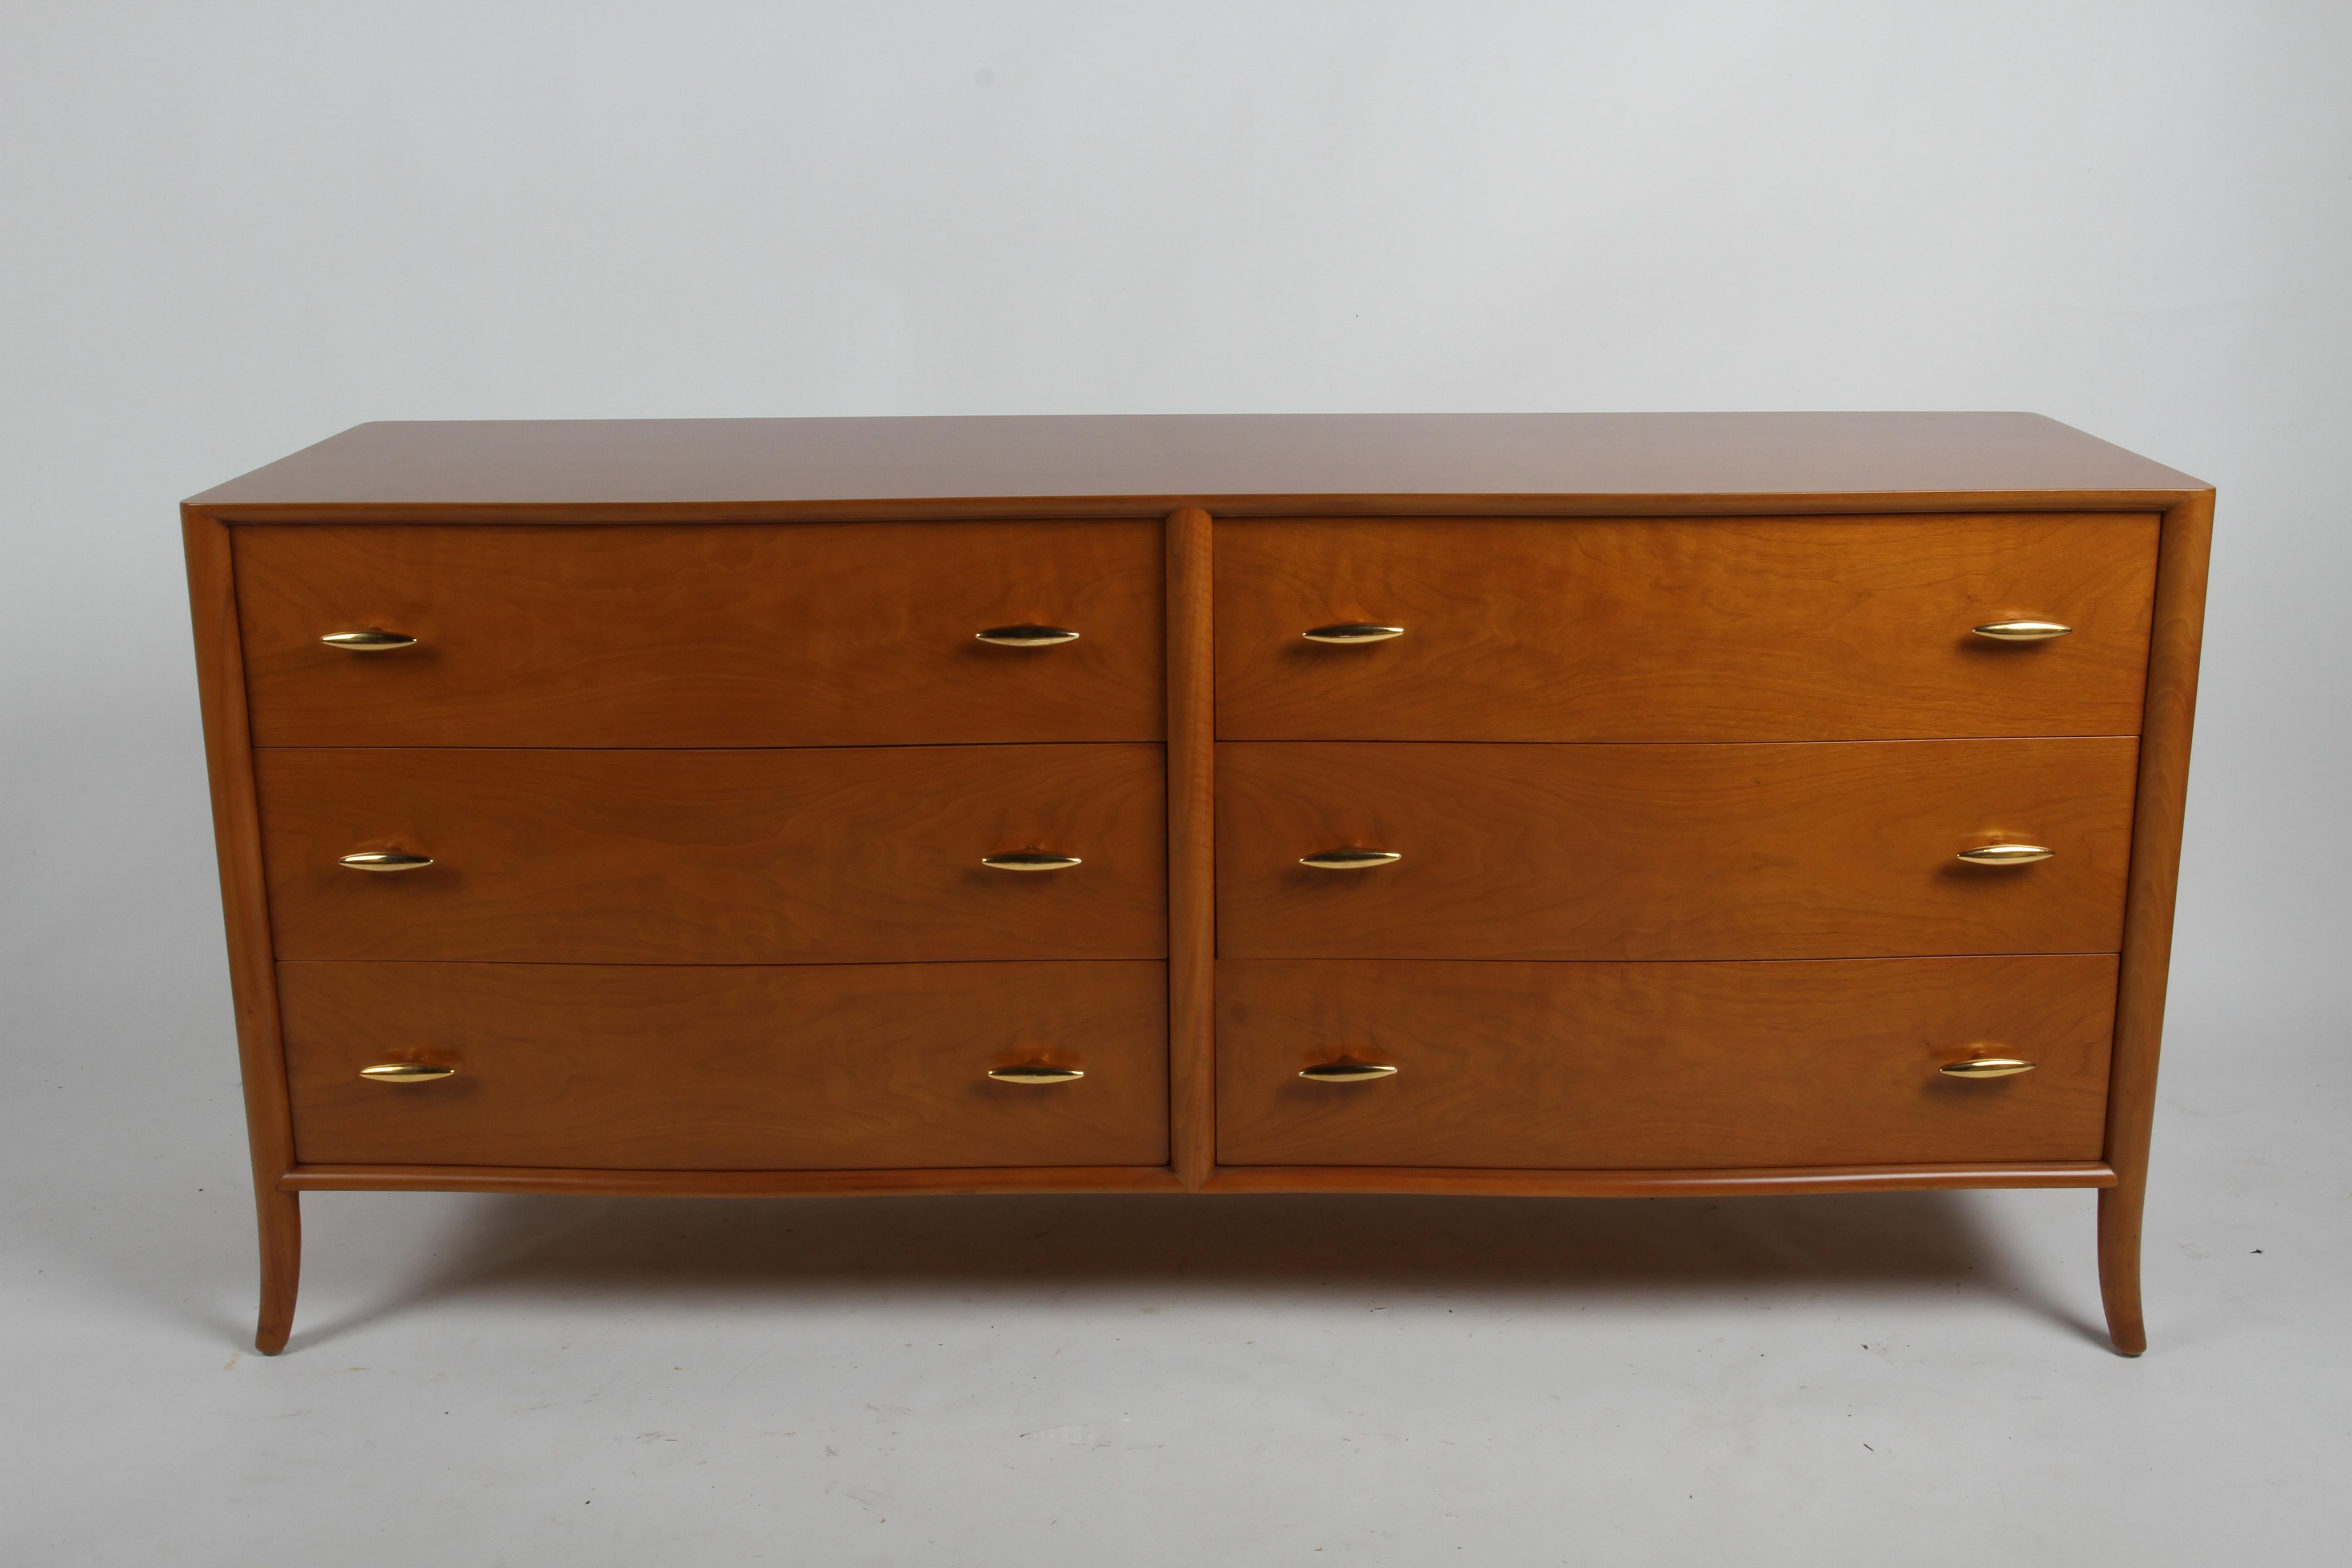 Rare and very elegant Mid Century T.H. Robsjohn-Gibbings for Widdicomb, 6 drawer walnut dresser, subtle serpentine form front with splayed legs, custom 22-carat gold porcelain hardware. Only slight loss / wear to some of the handles at their points.